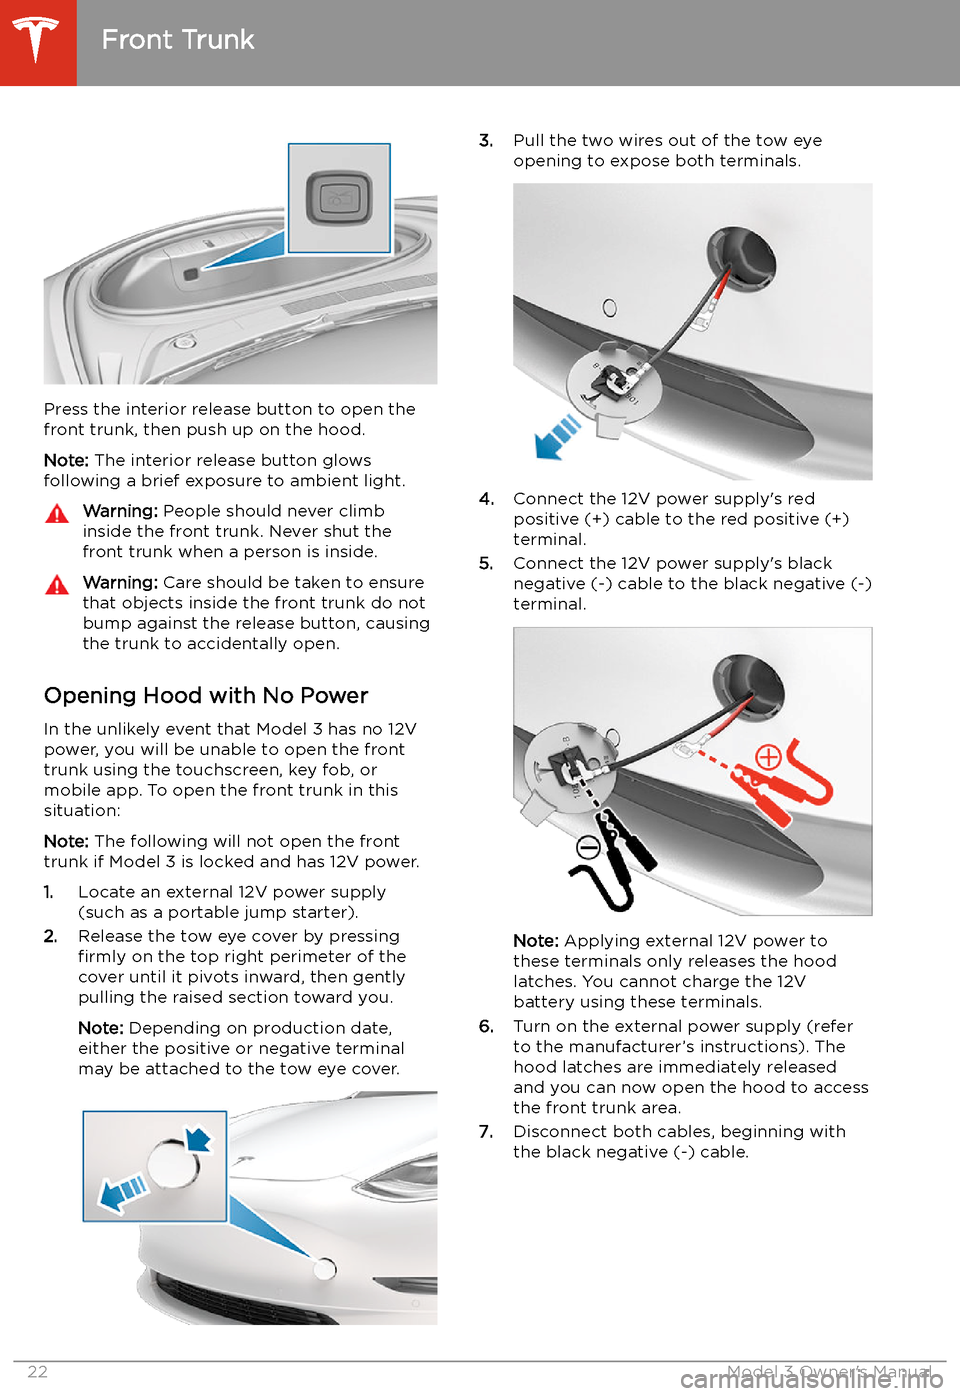 TESLA MODEL 3 2020  Owners Manuals Press the interior release button to open the
front trunk, then push up on the hood.
Note:  The interior release button glows
following a brief exposure to ambient light.
Warning:  People should never